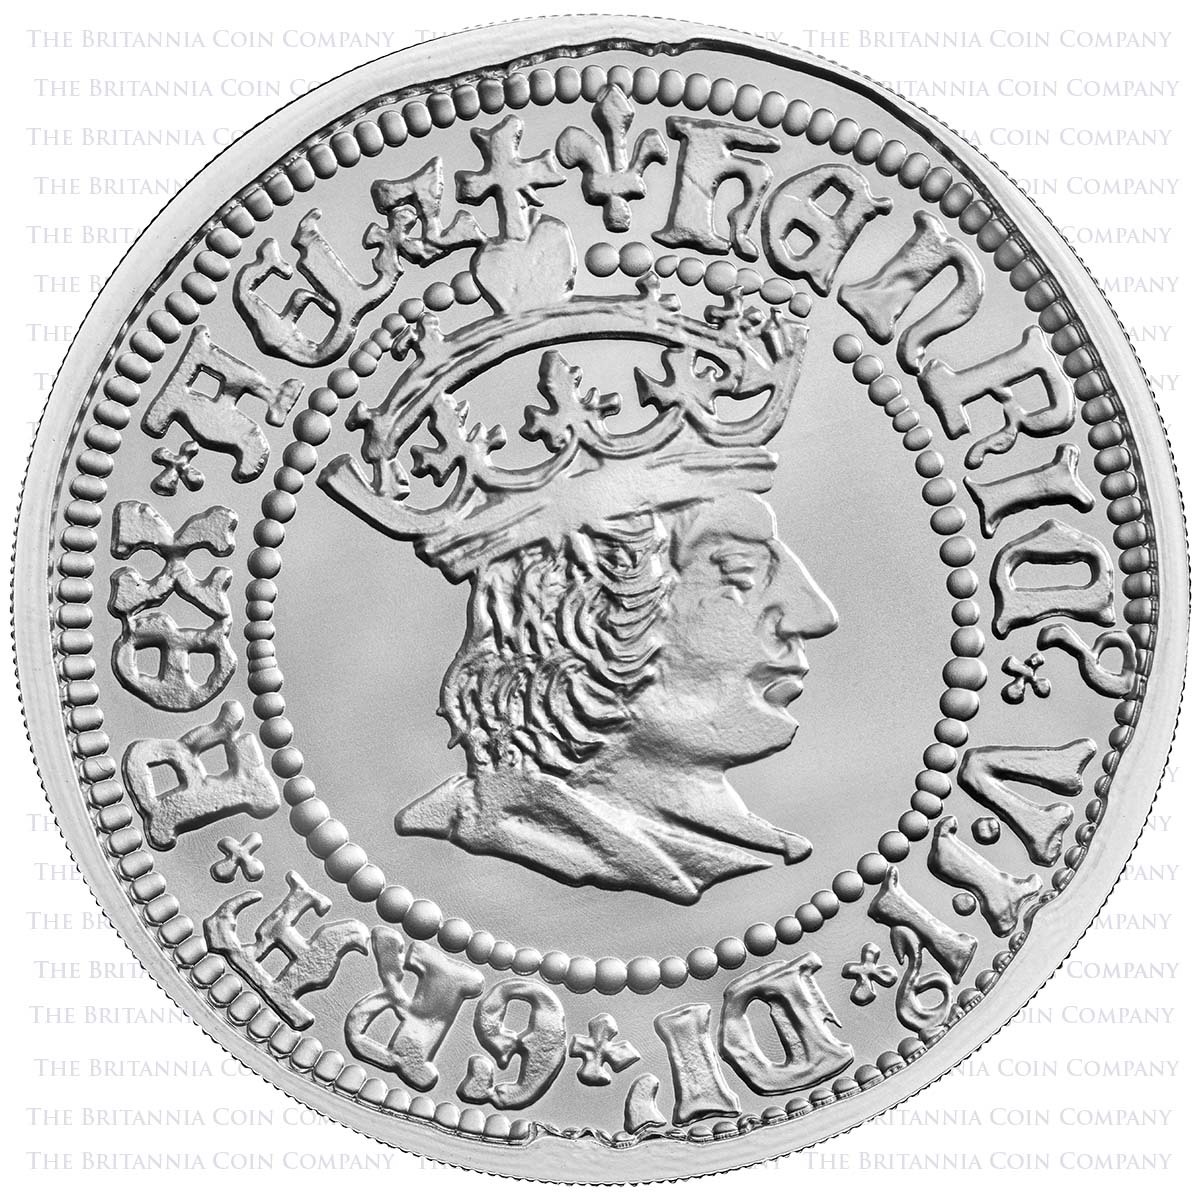 UK22H7S10 2022 British Monarchs Henry VII 1 Ounce Silver Proof Reverse